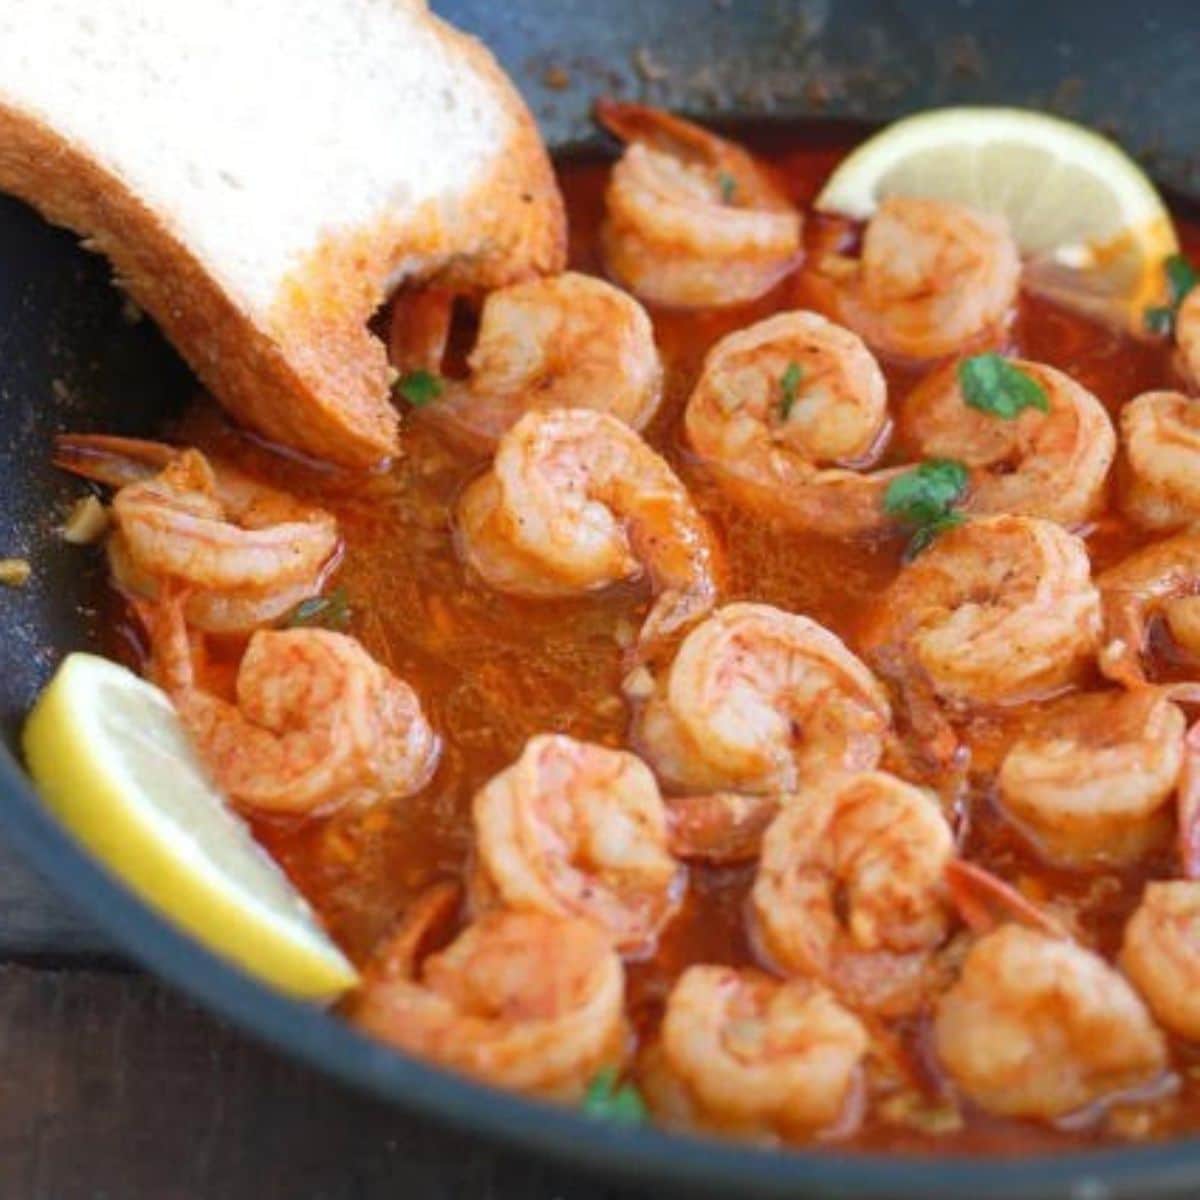 Pan with bbq shrimp, sliced lemon, and piece of bread. 